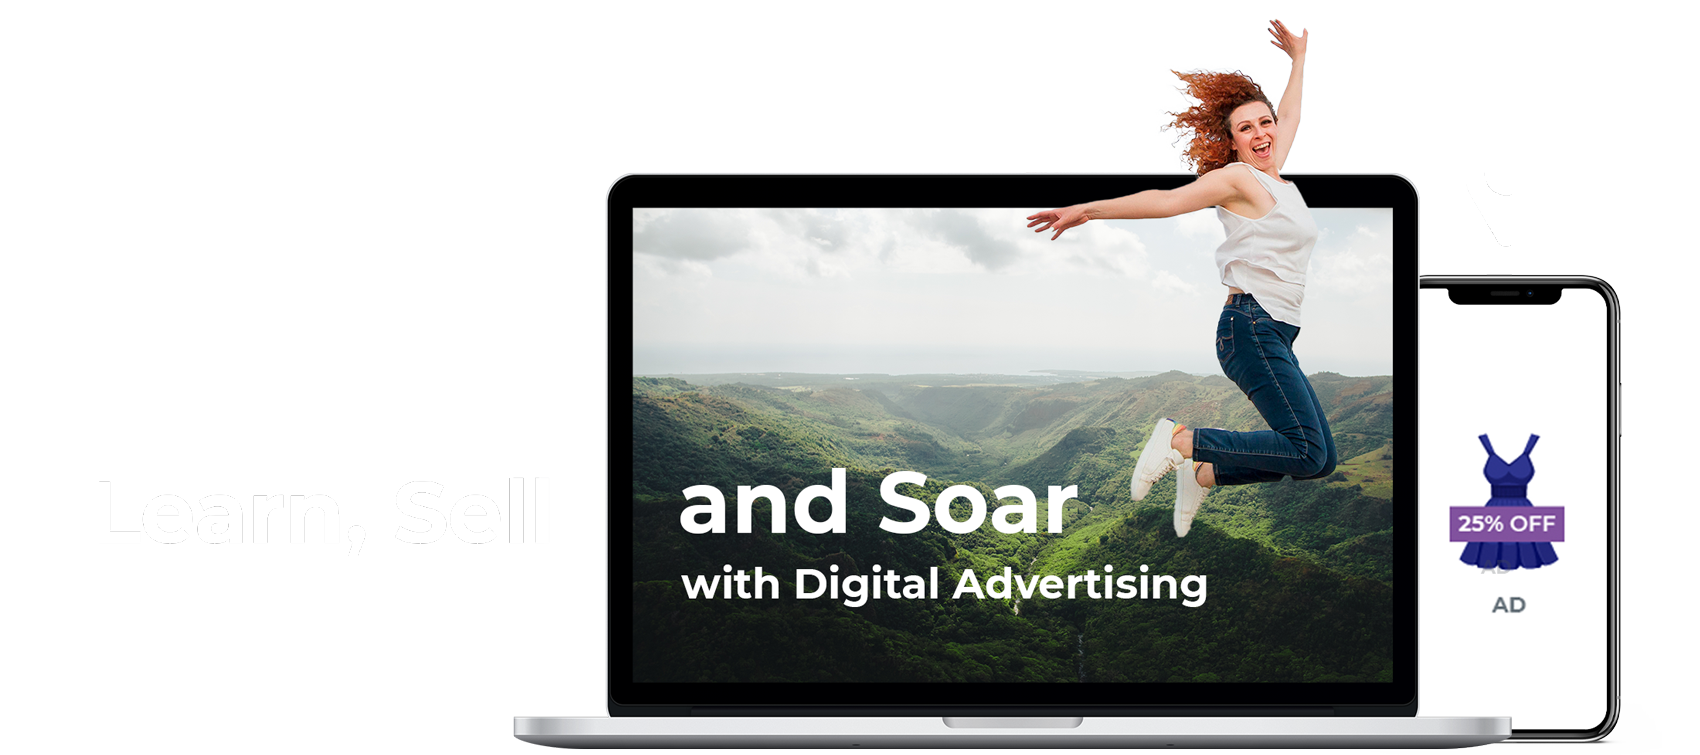 Learn, Sell and Soar with Digital Advertising